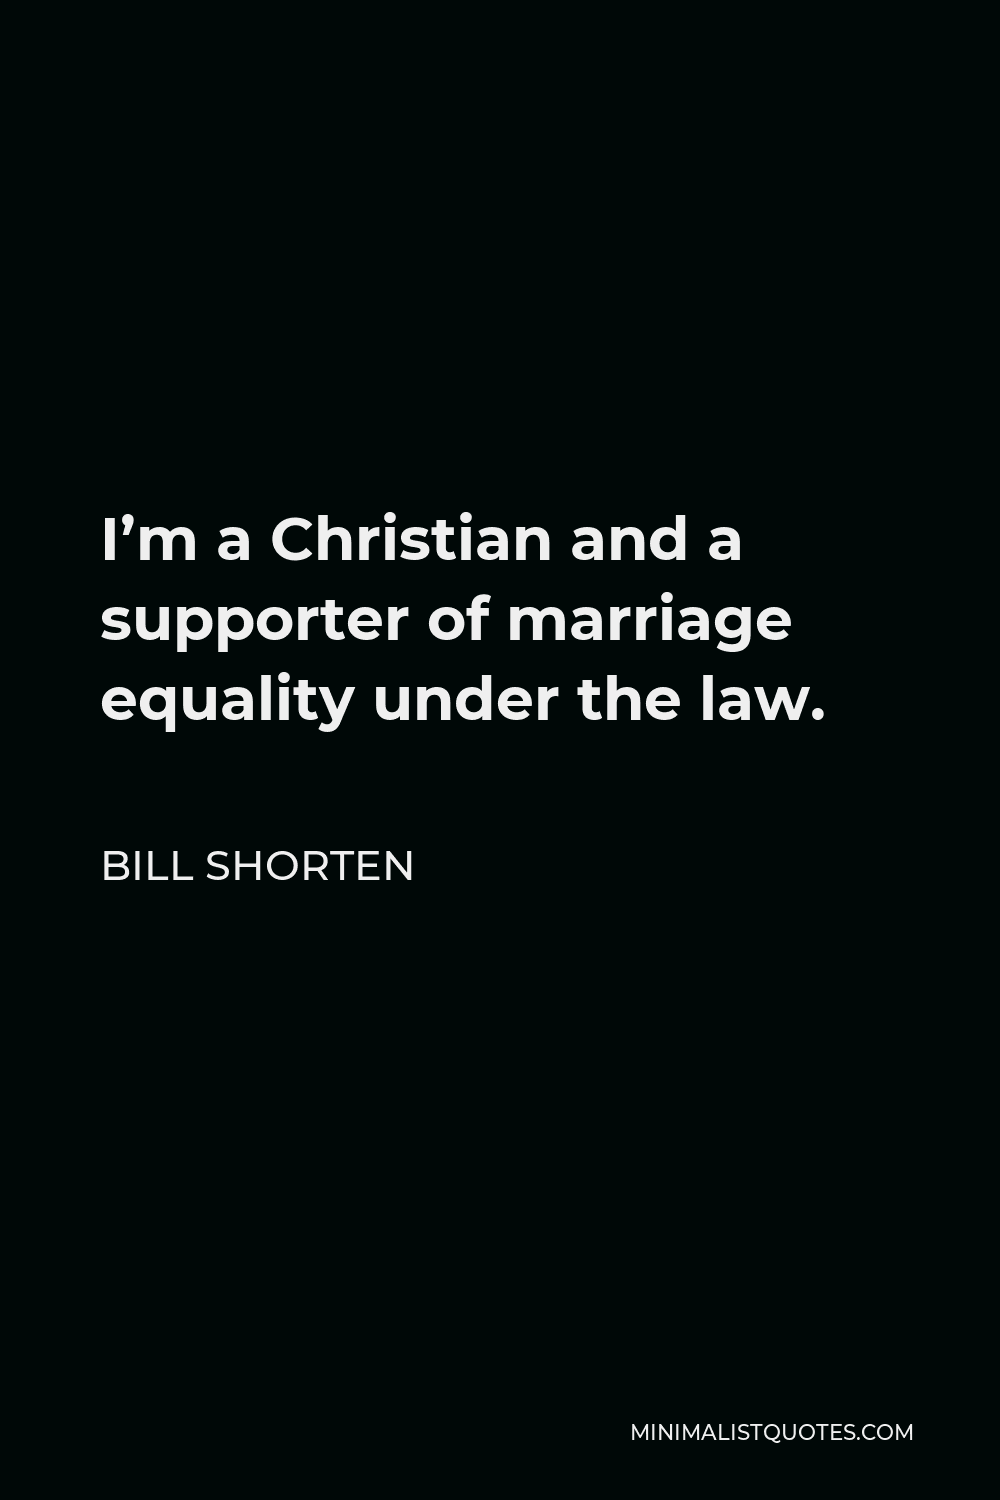 Bill Shorten Quote - I’m a Christian and a supporter of marriage equality under the law.